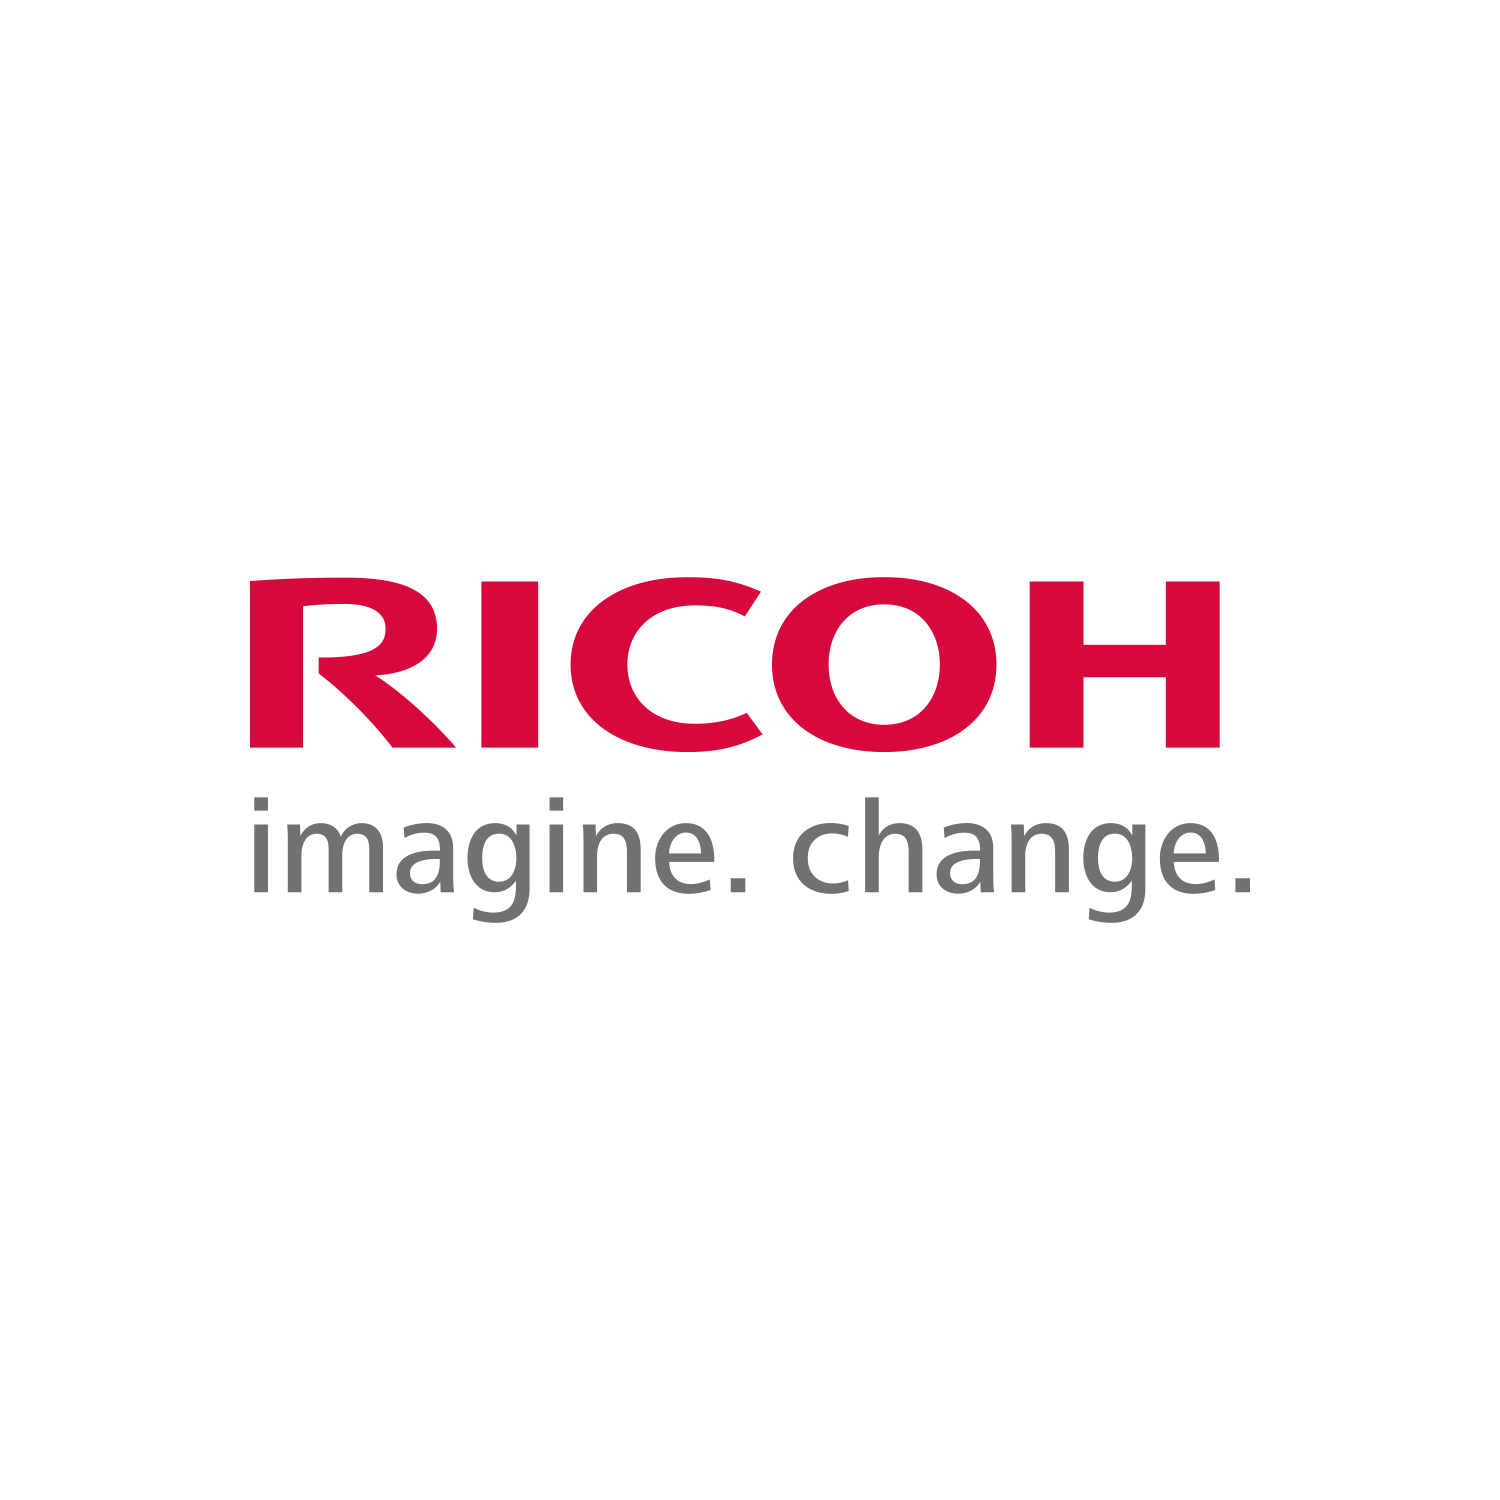 New Ricoh Logo - Ricoh Global | EMPOWERING DIGITAL WORKPLACES